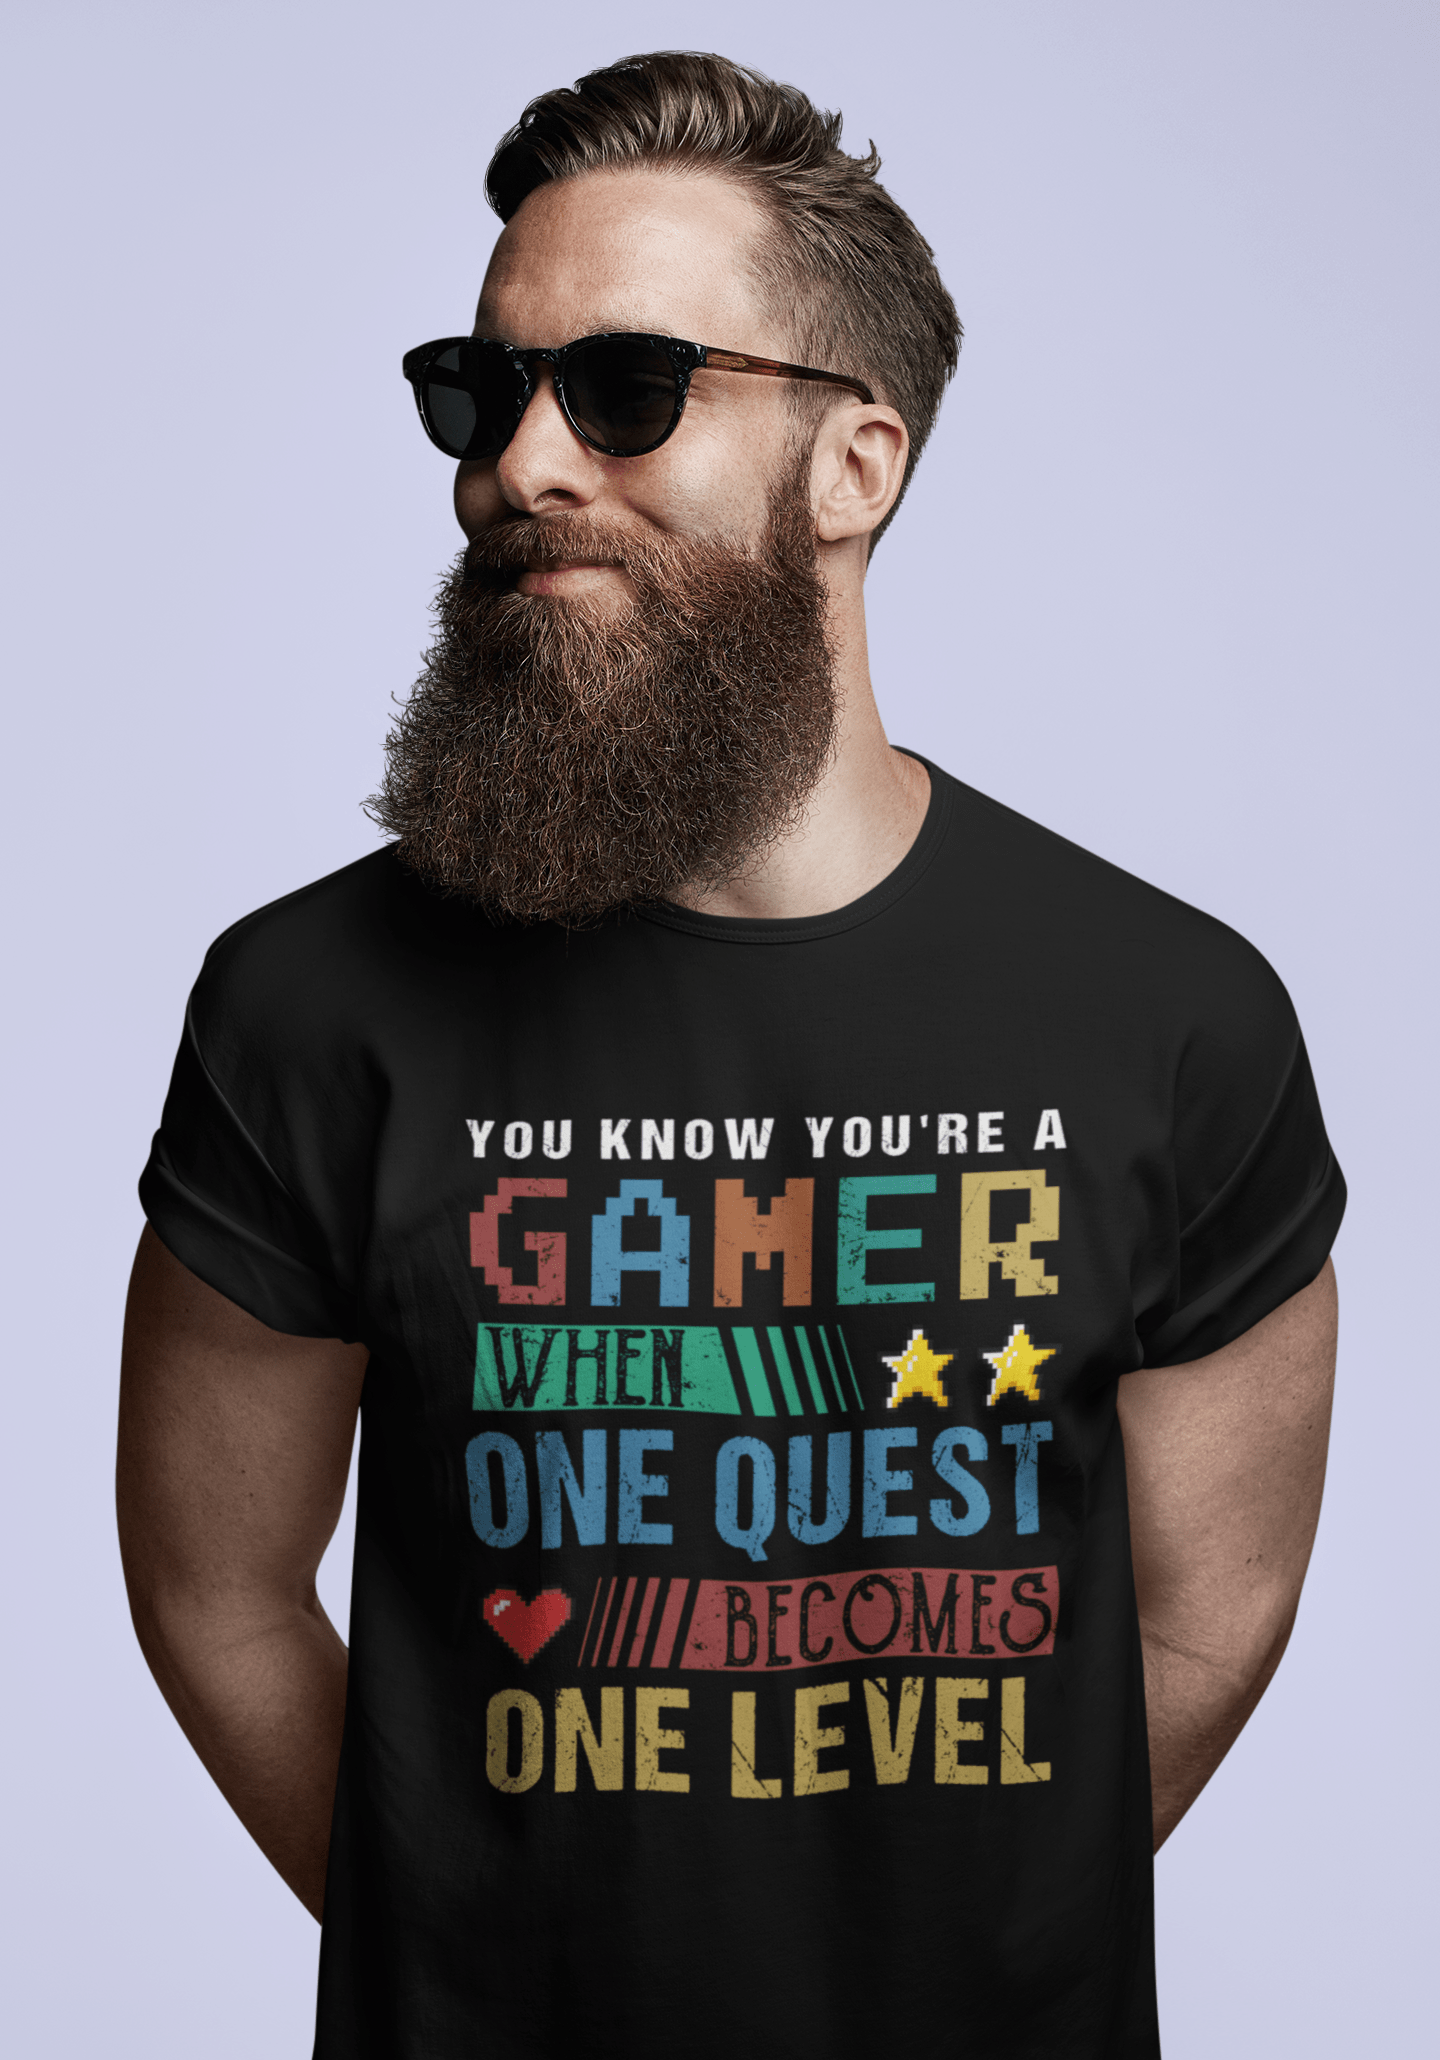 ULTRABASIC Men's T-Shirt One Quest Becomes One Level - Gaming Quote - Joke Tee